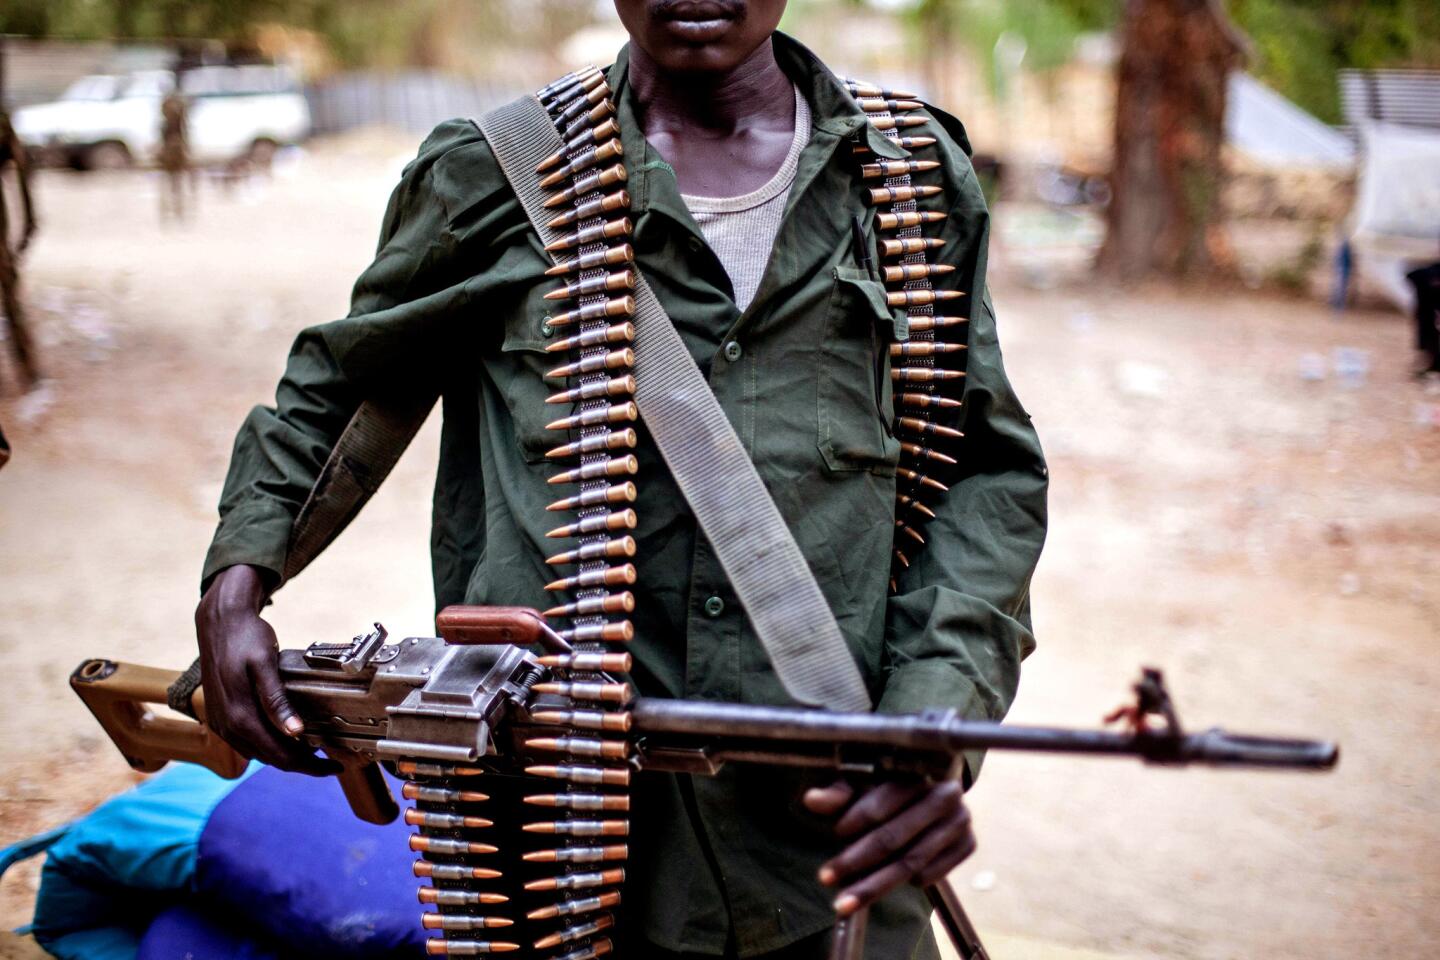 South Sudan conflict and reconciliation